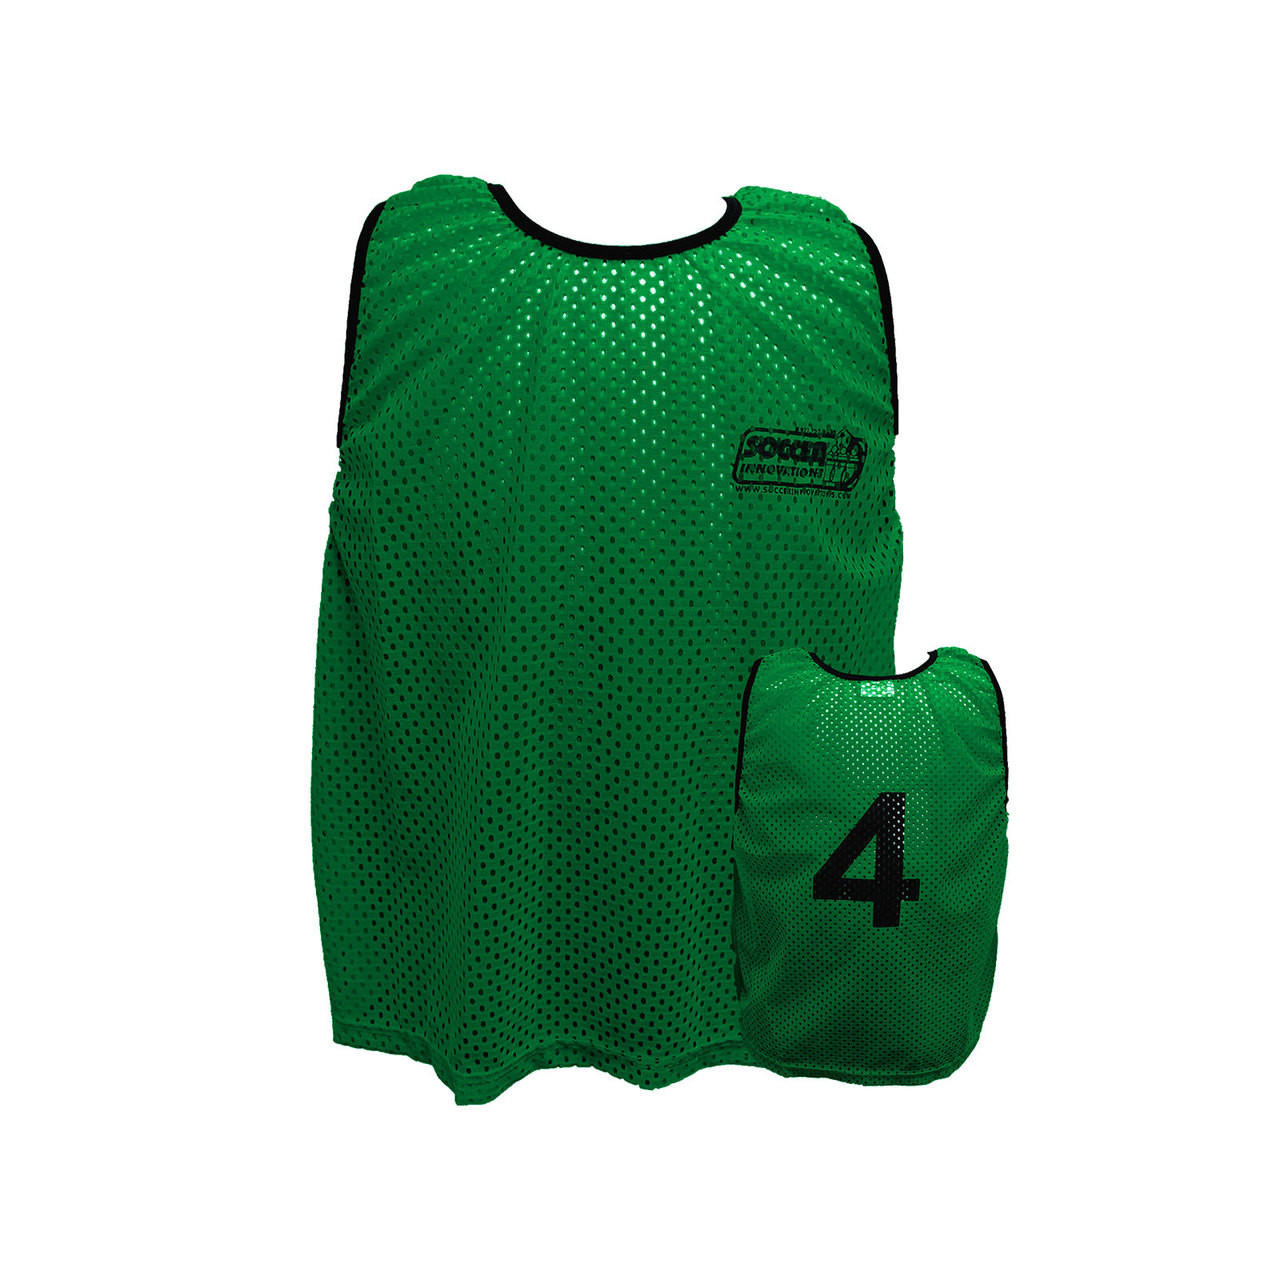 Soccer Jersey -Official Home, Slim-fit, Breathable, Green & Black